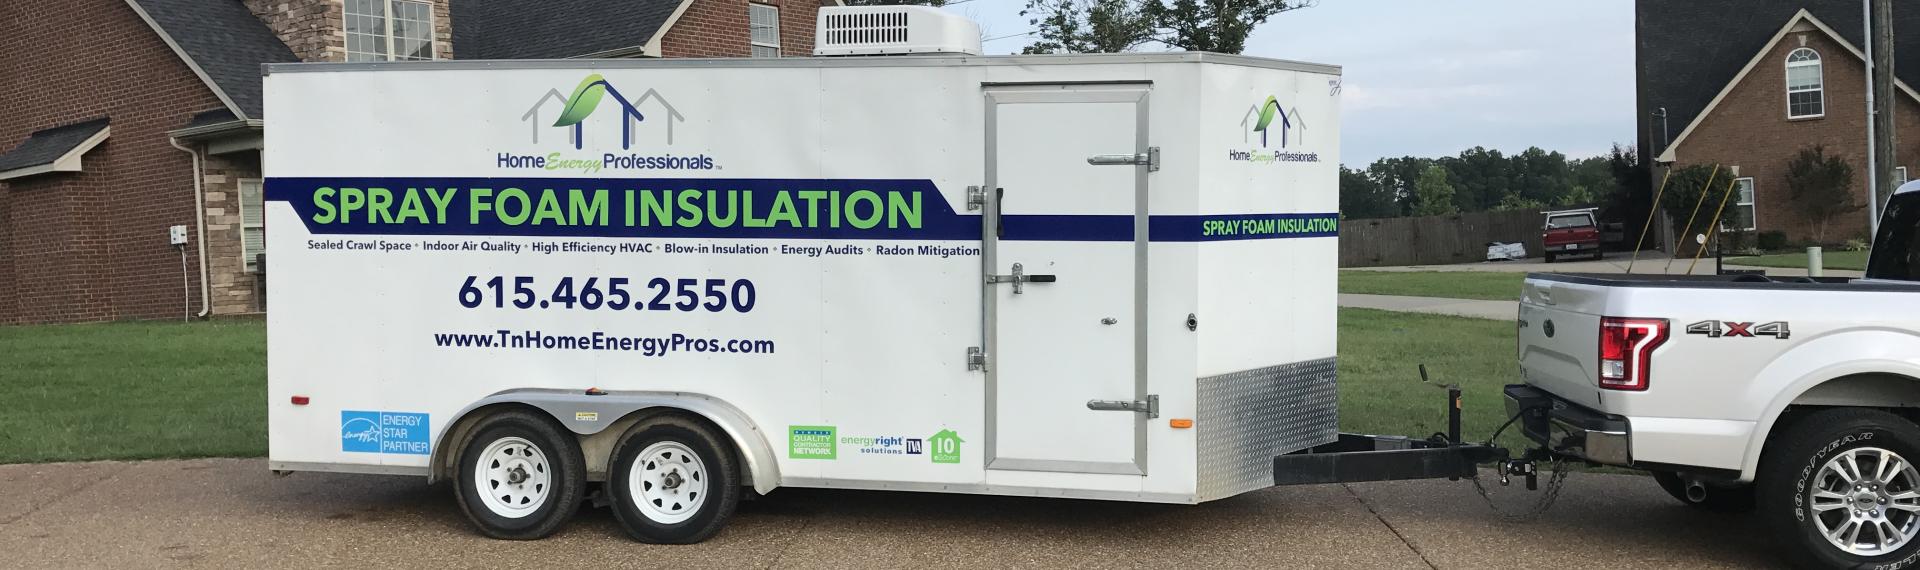 Home Energy Professionals trailer